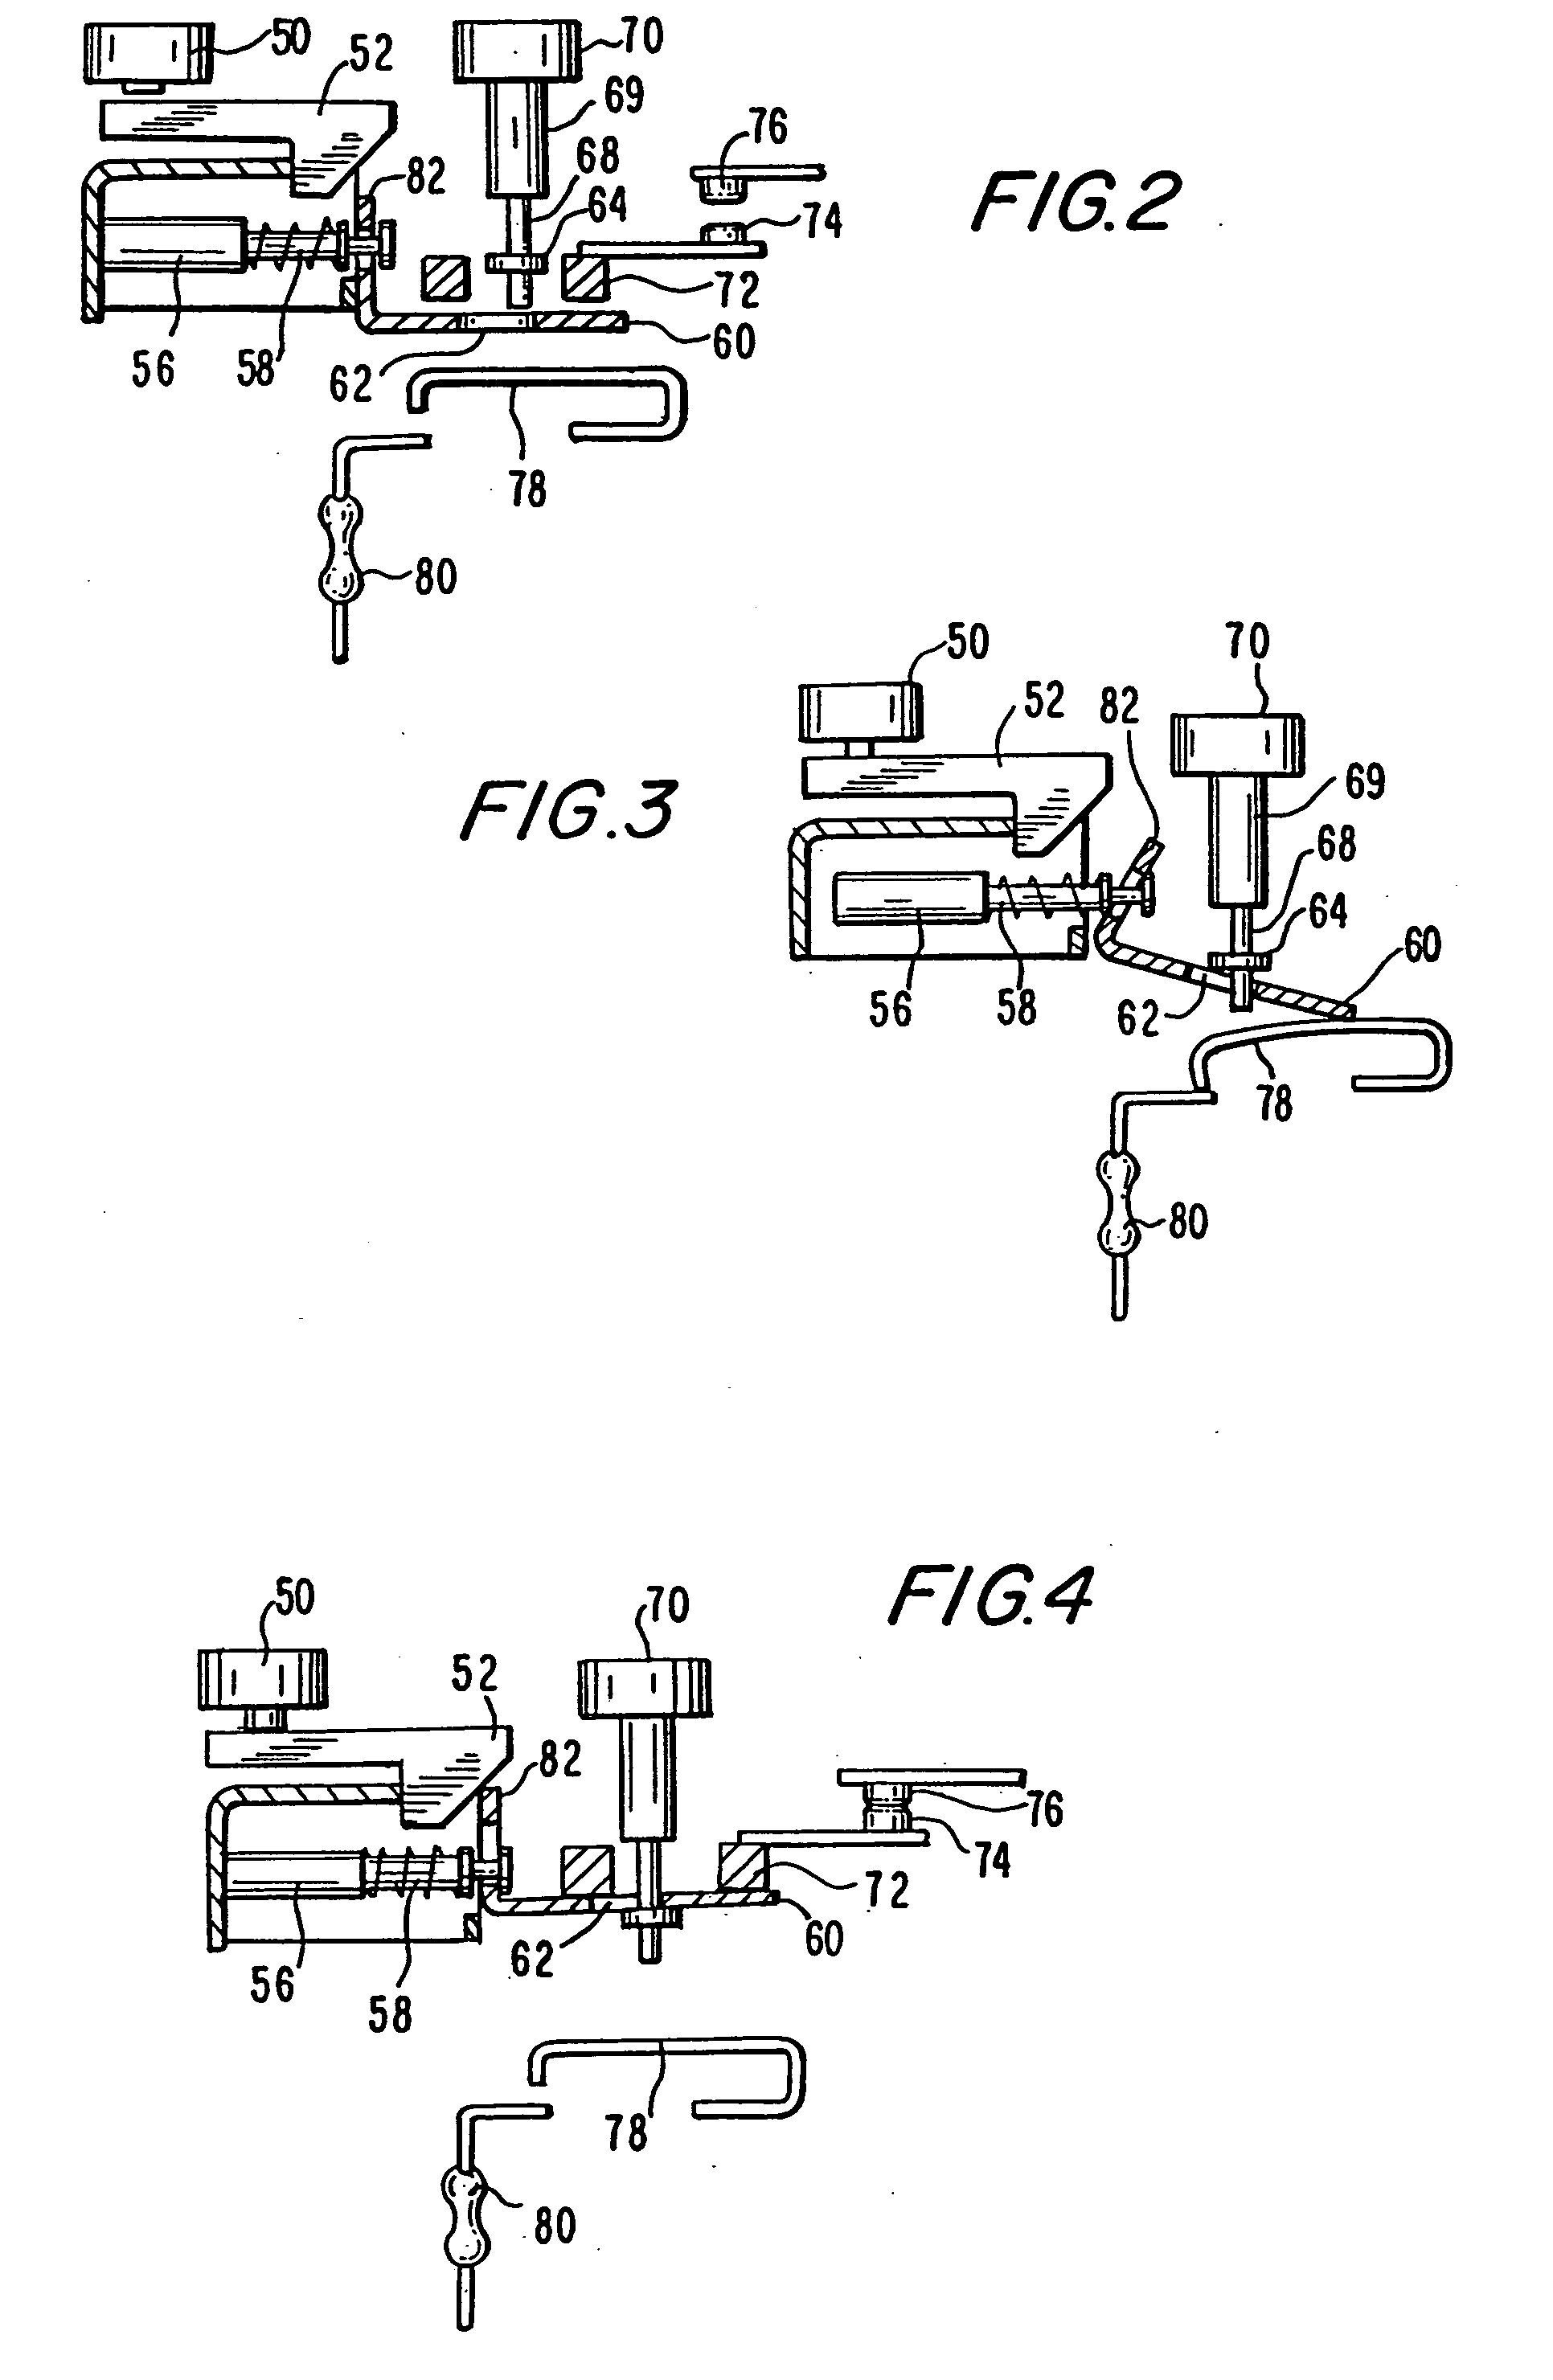 Reset lockout and trip for circuit interrupting device